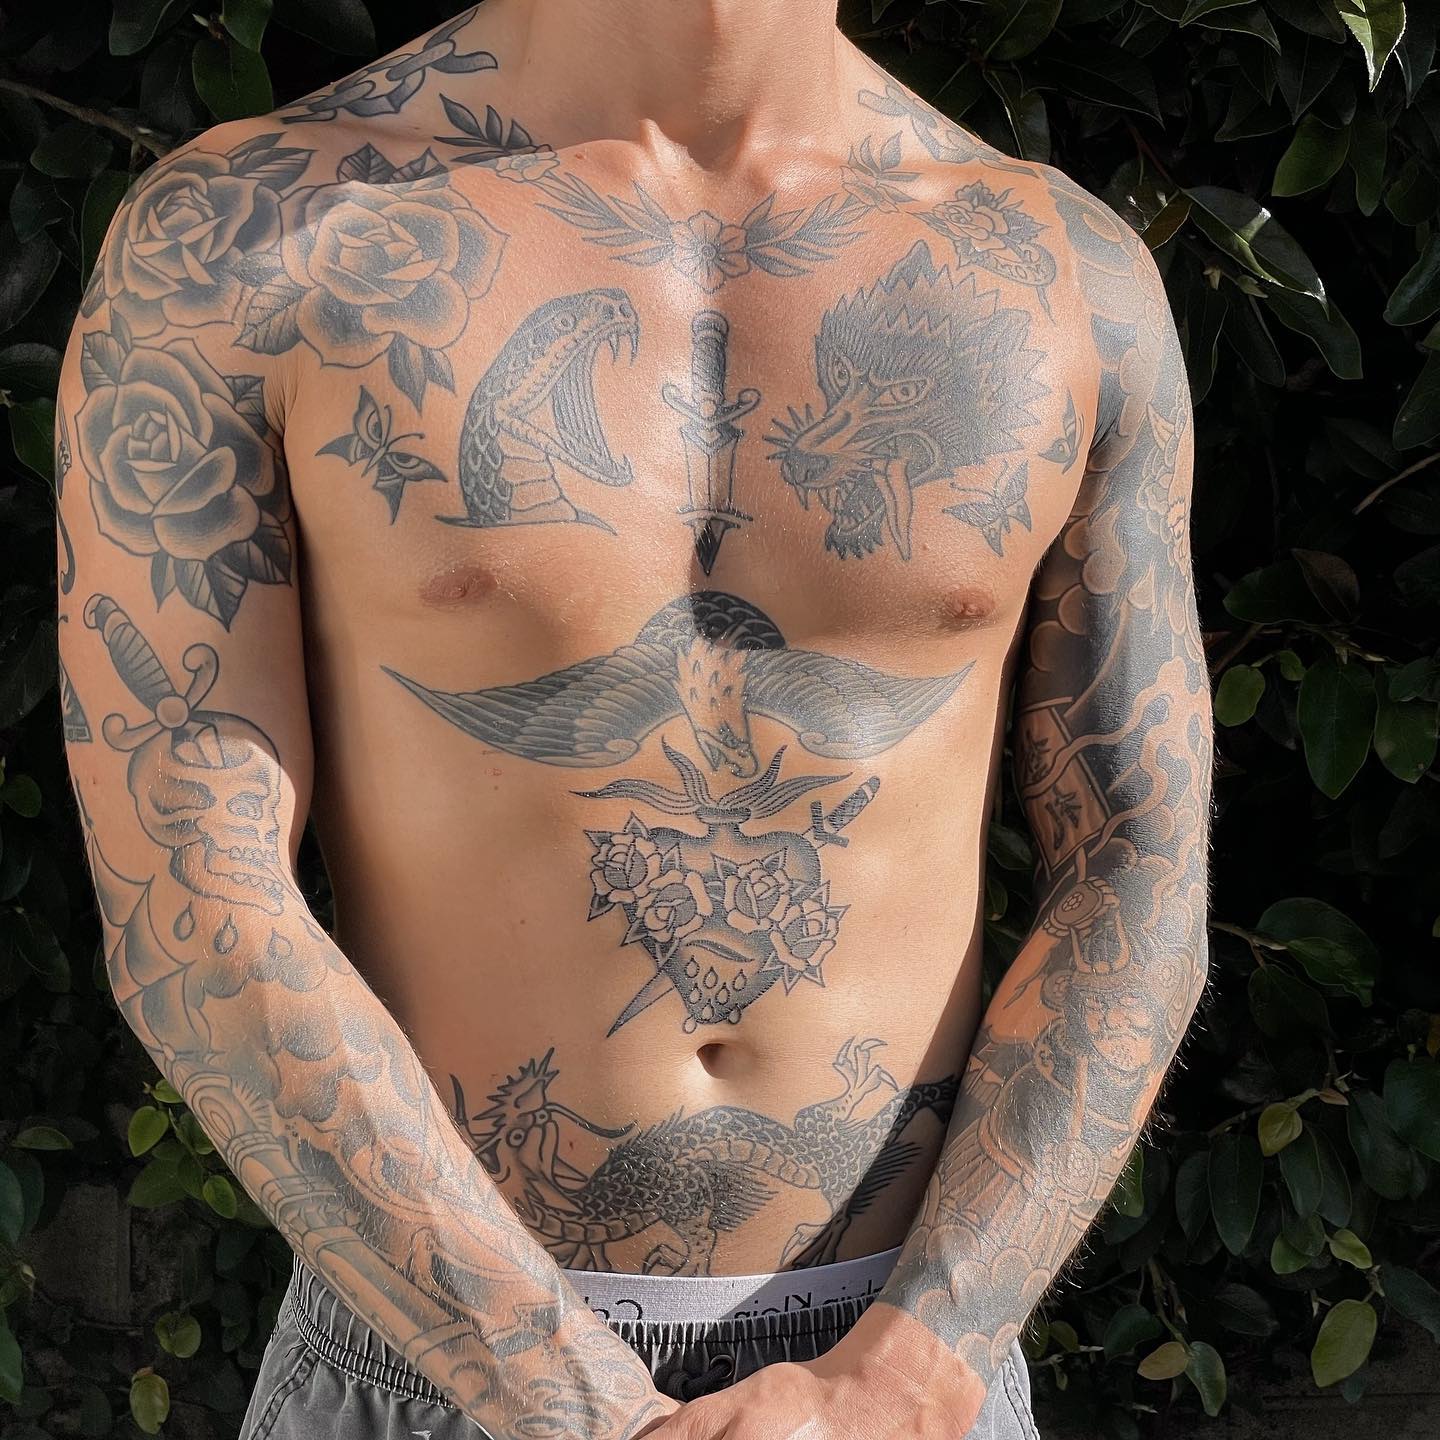  Tattoo Sleeve Tattoo and more ideas youve been looking for